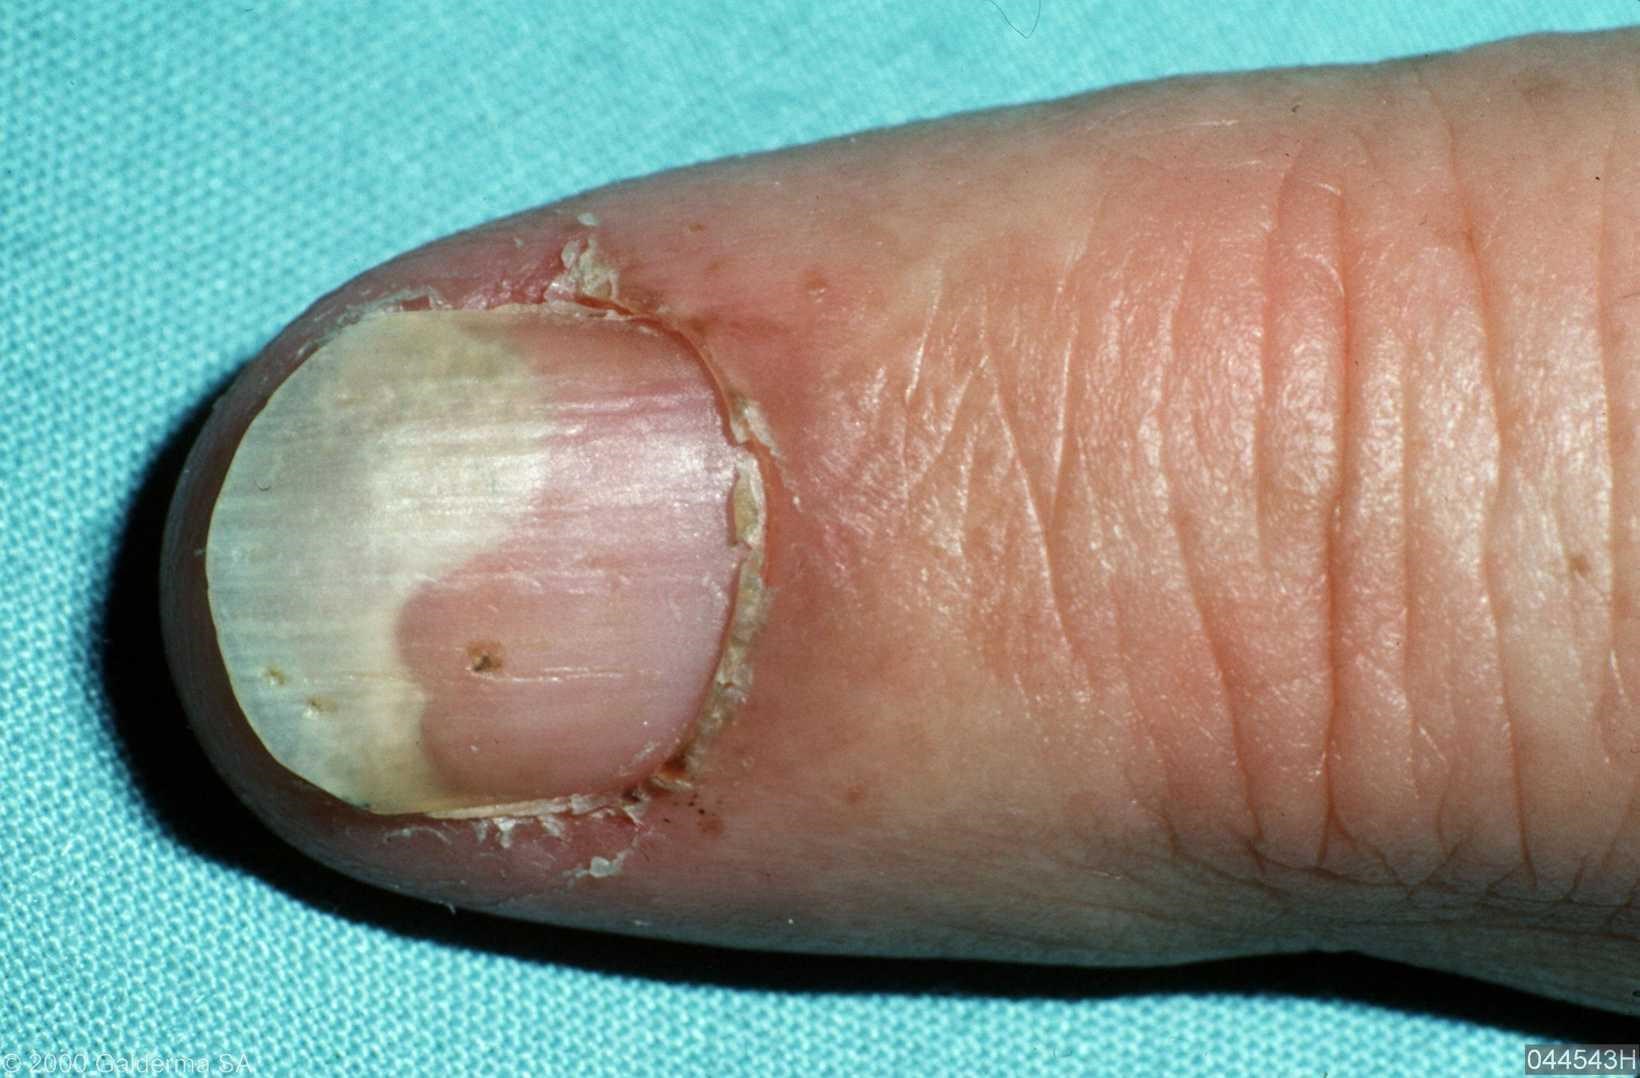 nail psoriasis pictures pictures, photos